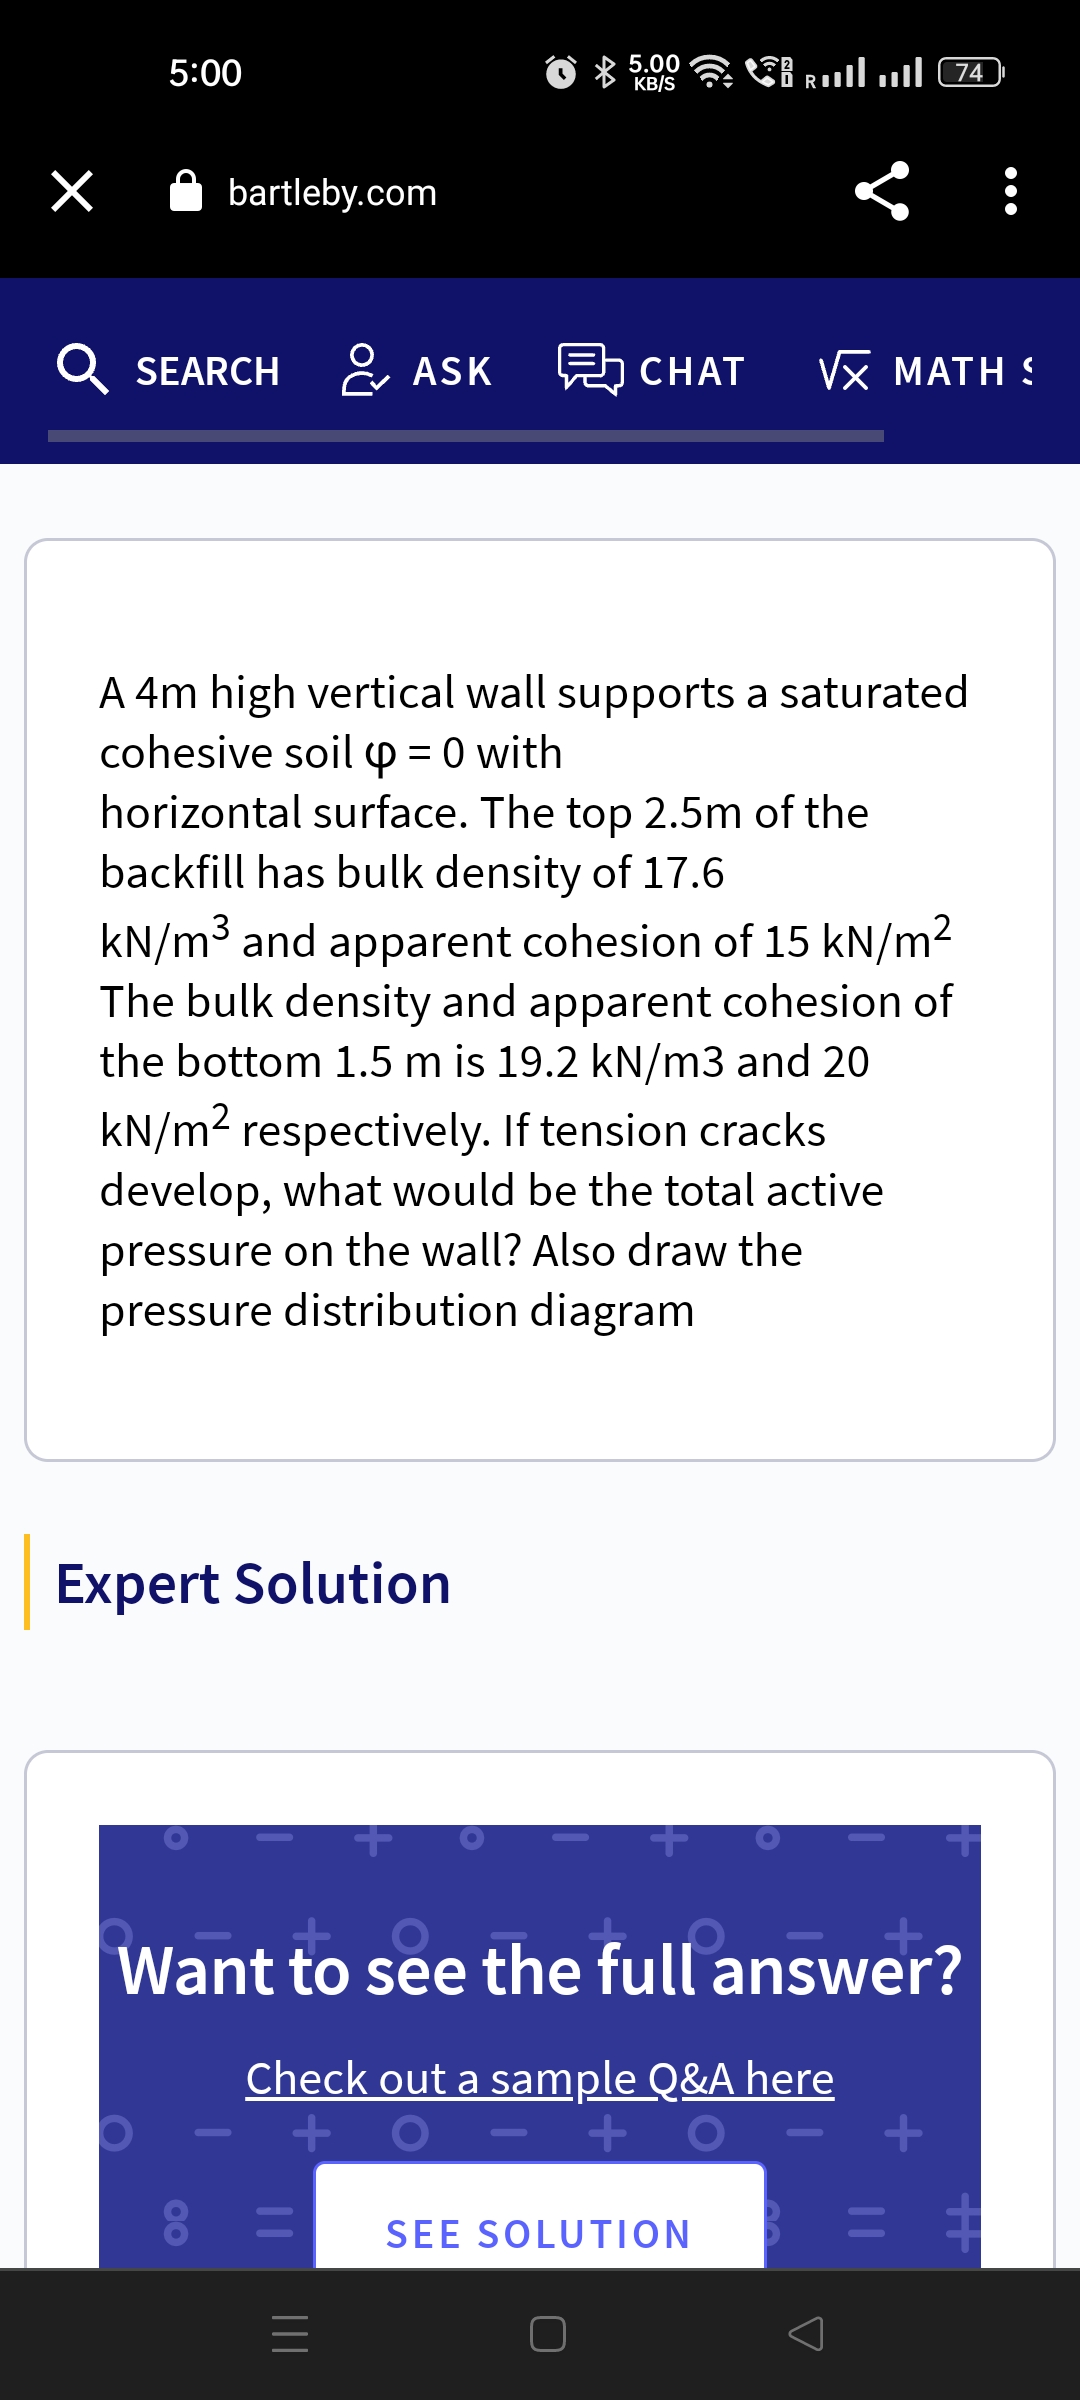 ×
5:00
bartleby.com
QSEARCH ASK
&
Expert Solution
5.00
KB/S
A 4m high vertical wall supports a saturated
cohesive soil = 0 with
horizontal surface. The top 2.5m of the
backfill has bulk density of 17.6
kN/m³ and apparent cohesion of 15 kN/m²
The bulk density and apparent cohesion of
the bottom 1.5 m is 19.2 kN/m3 and 20
kN/m² respectively. If tension cracks
develop, what would be the total active
pressure on the wall? Also draw the
pressure distribution diagram
=
...ll ...l C74
CHAT √x MATH S
|||
Want to see the full answer?
Check out a sample Q&A here
+
+
SEE SOLUTION
+